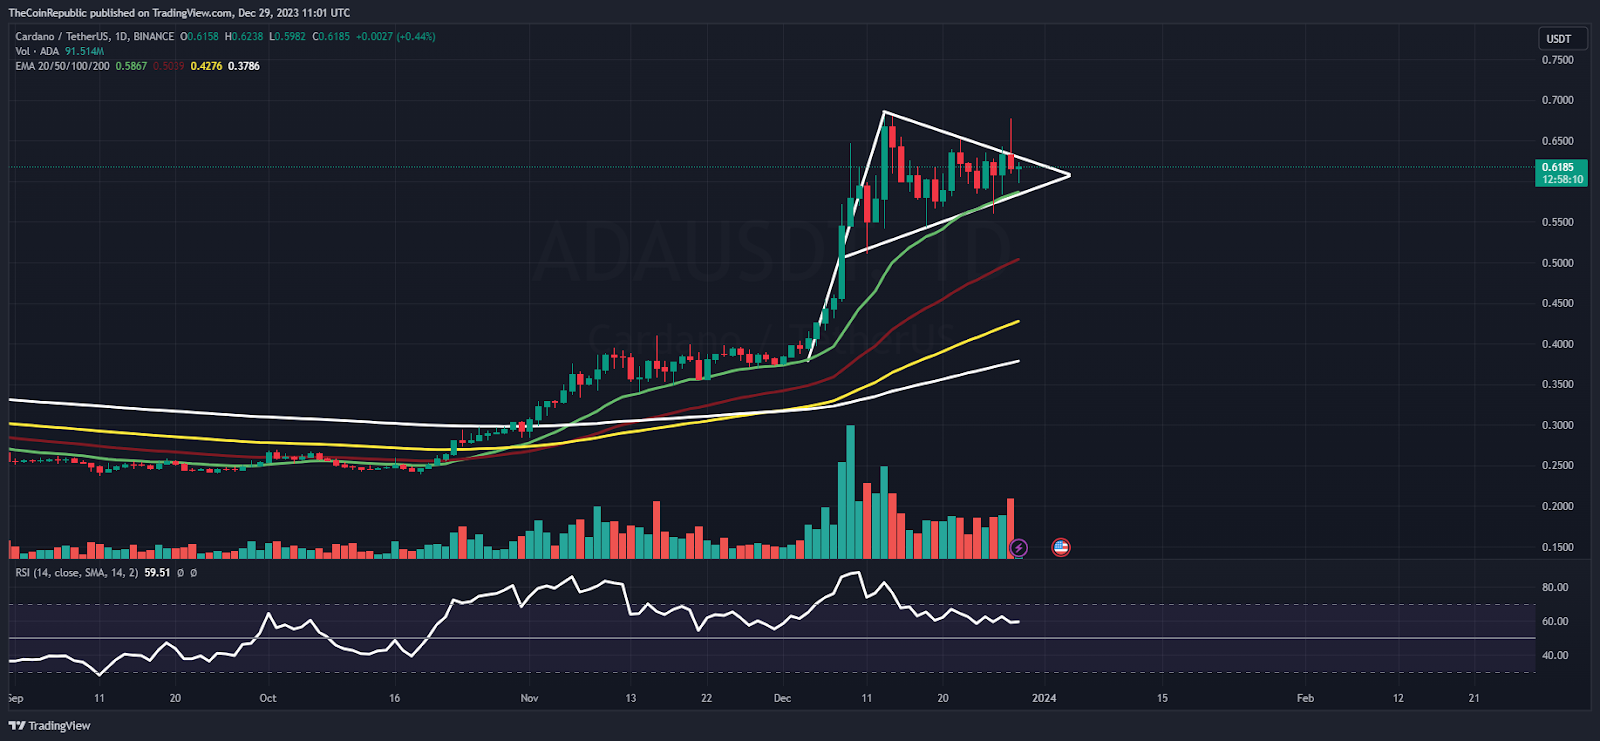 ADA Price Prediction: Is ADA Ready to Boost Above $0.7000?